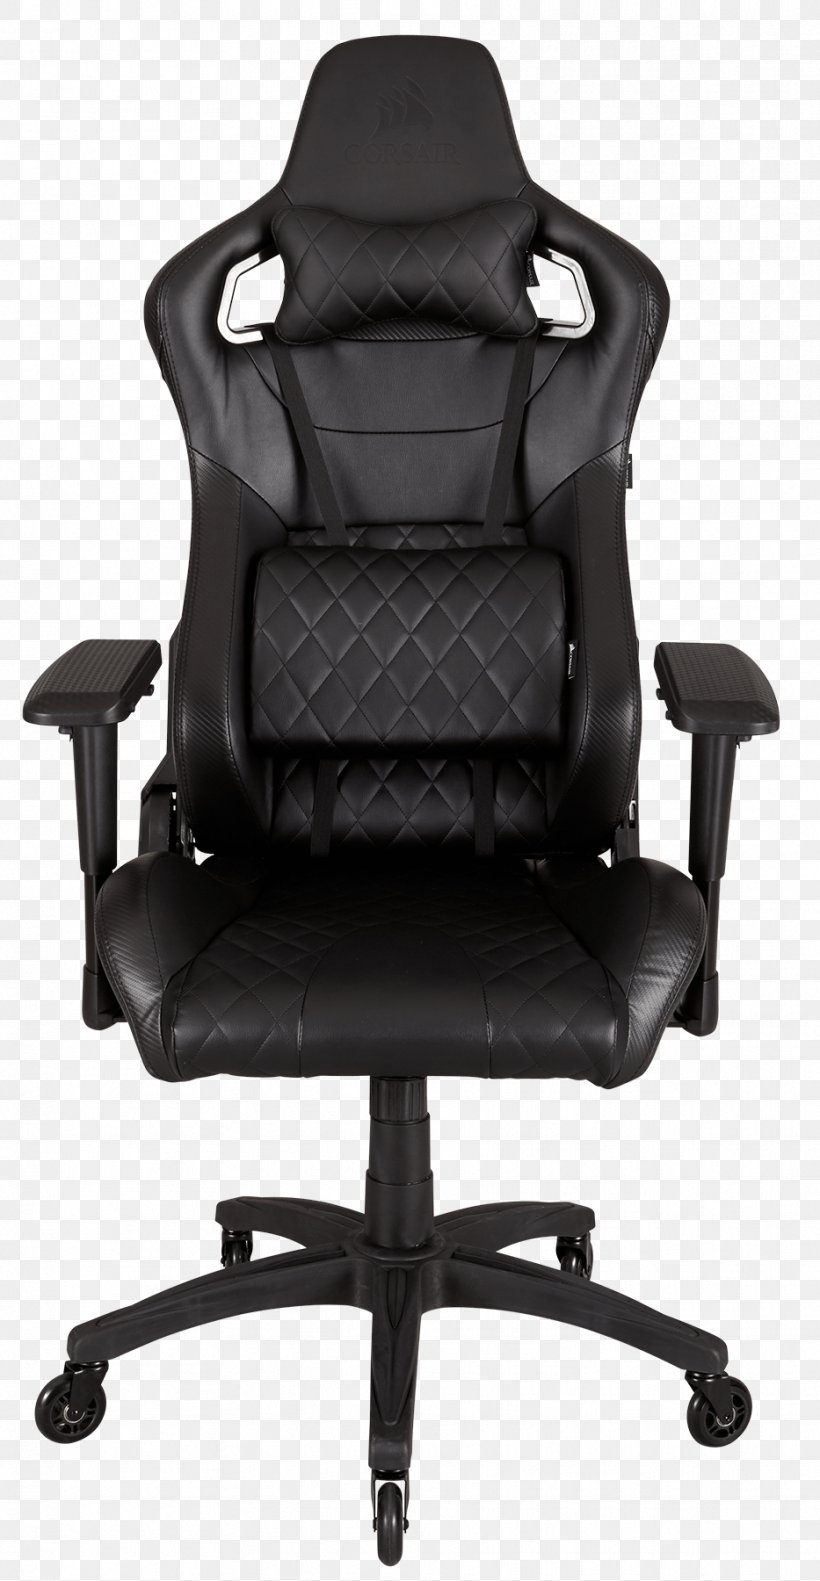 Computer Cases & Housings Seat Chair Caster Furniture, PNG, 933x1800px, Computer Cases Housings, Armrest, Black, Car Seat Cover, Caster Download Free